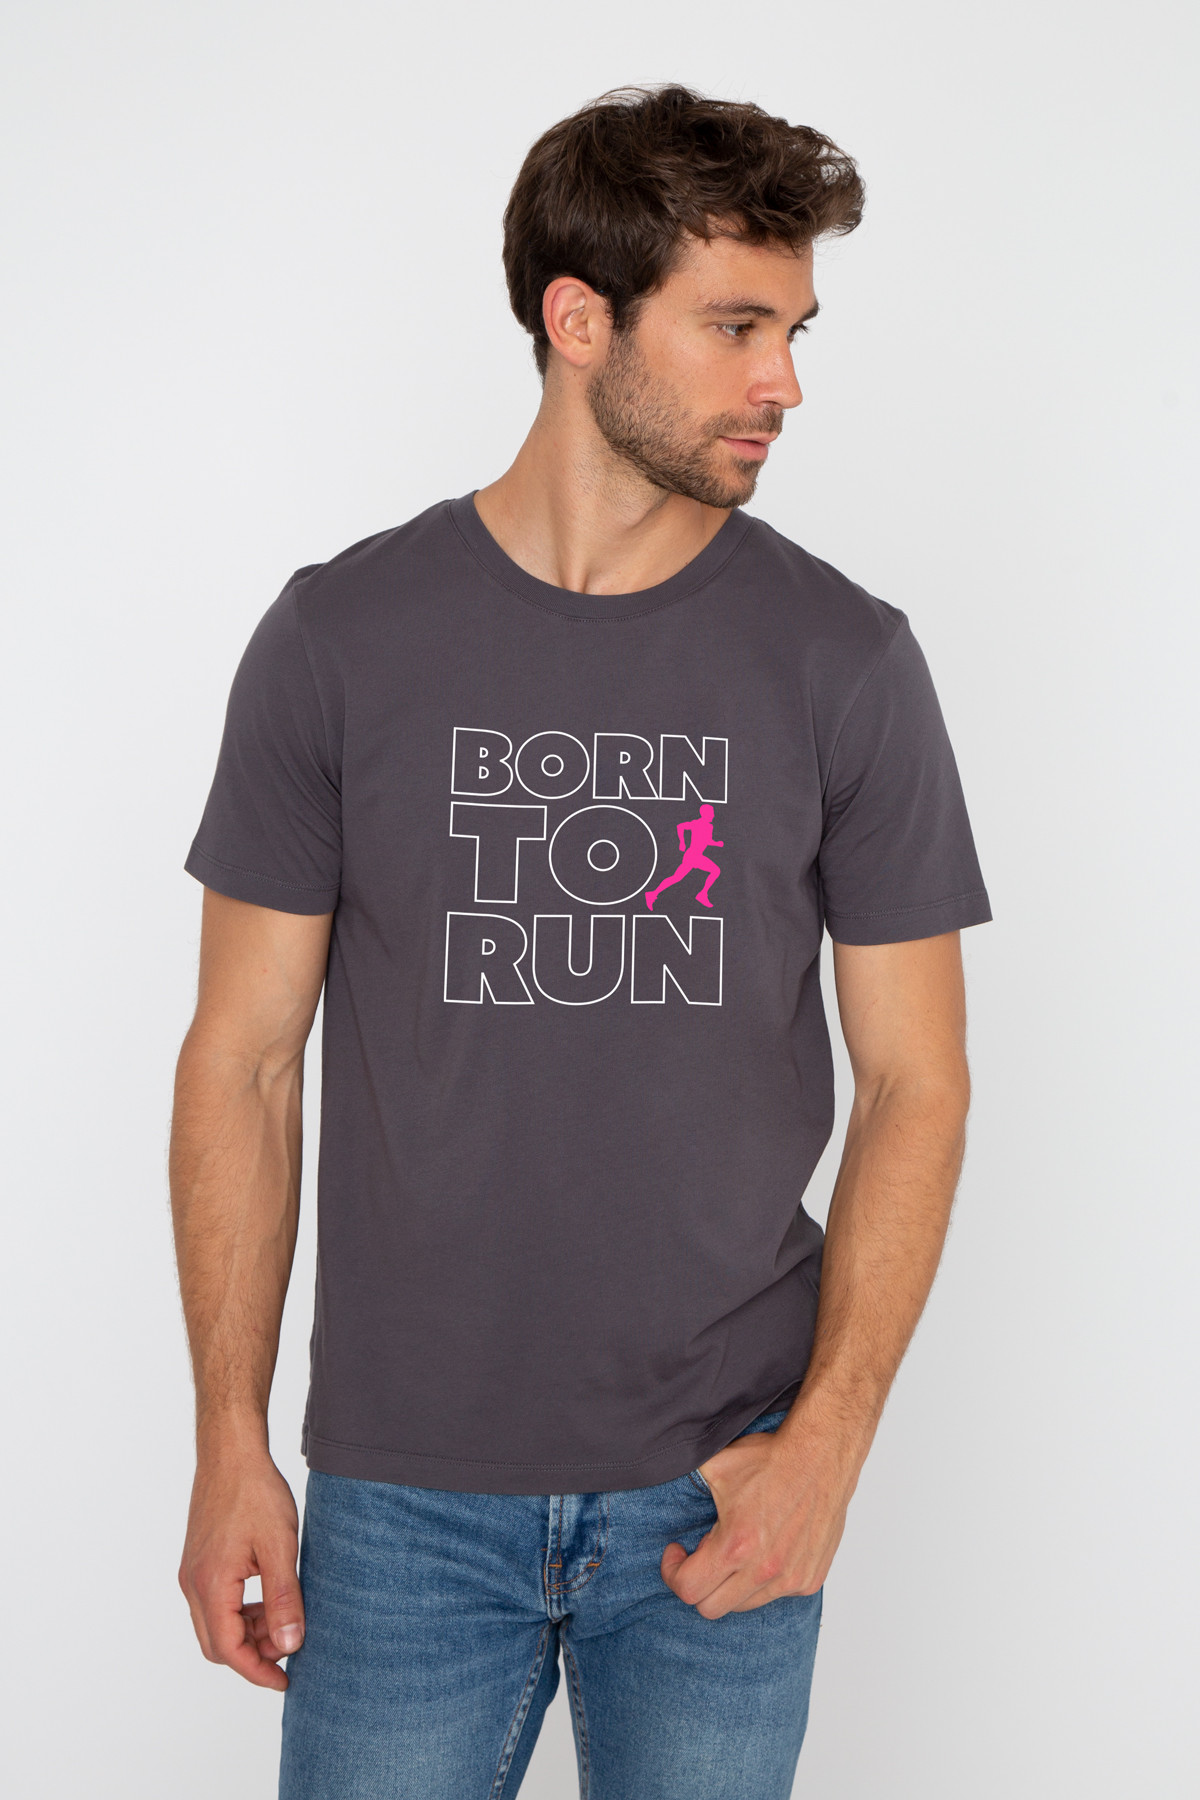 Photo de Anciennes collections homme T-shirt BORN TO RUN chez French Disorder